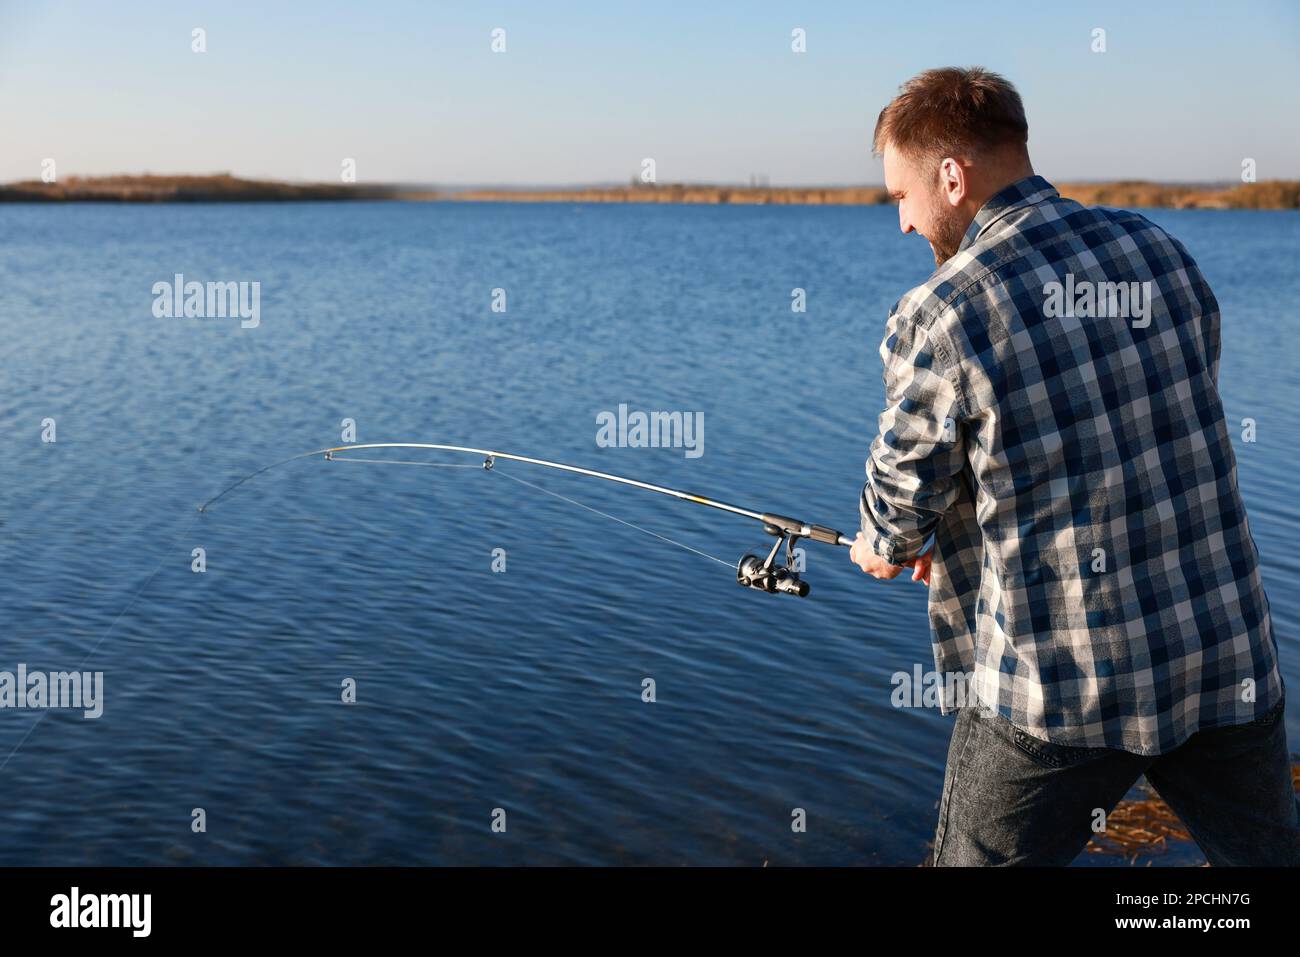 Fisherman with rod fishing at riverside. Recreational activity